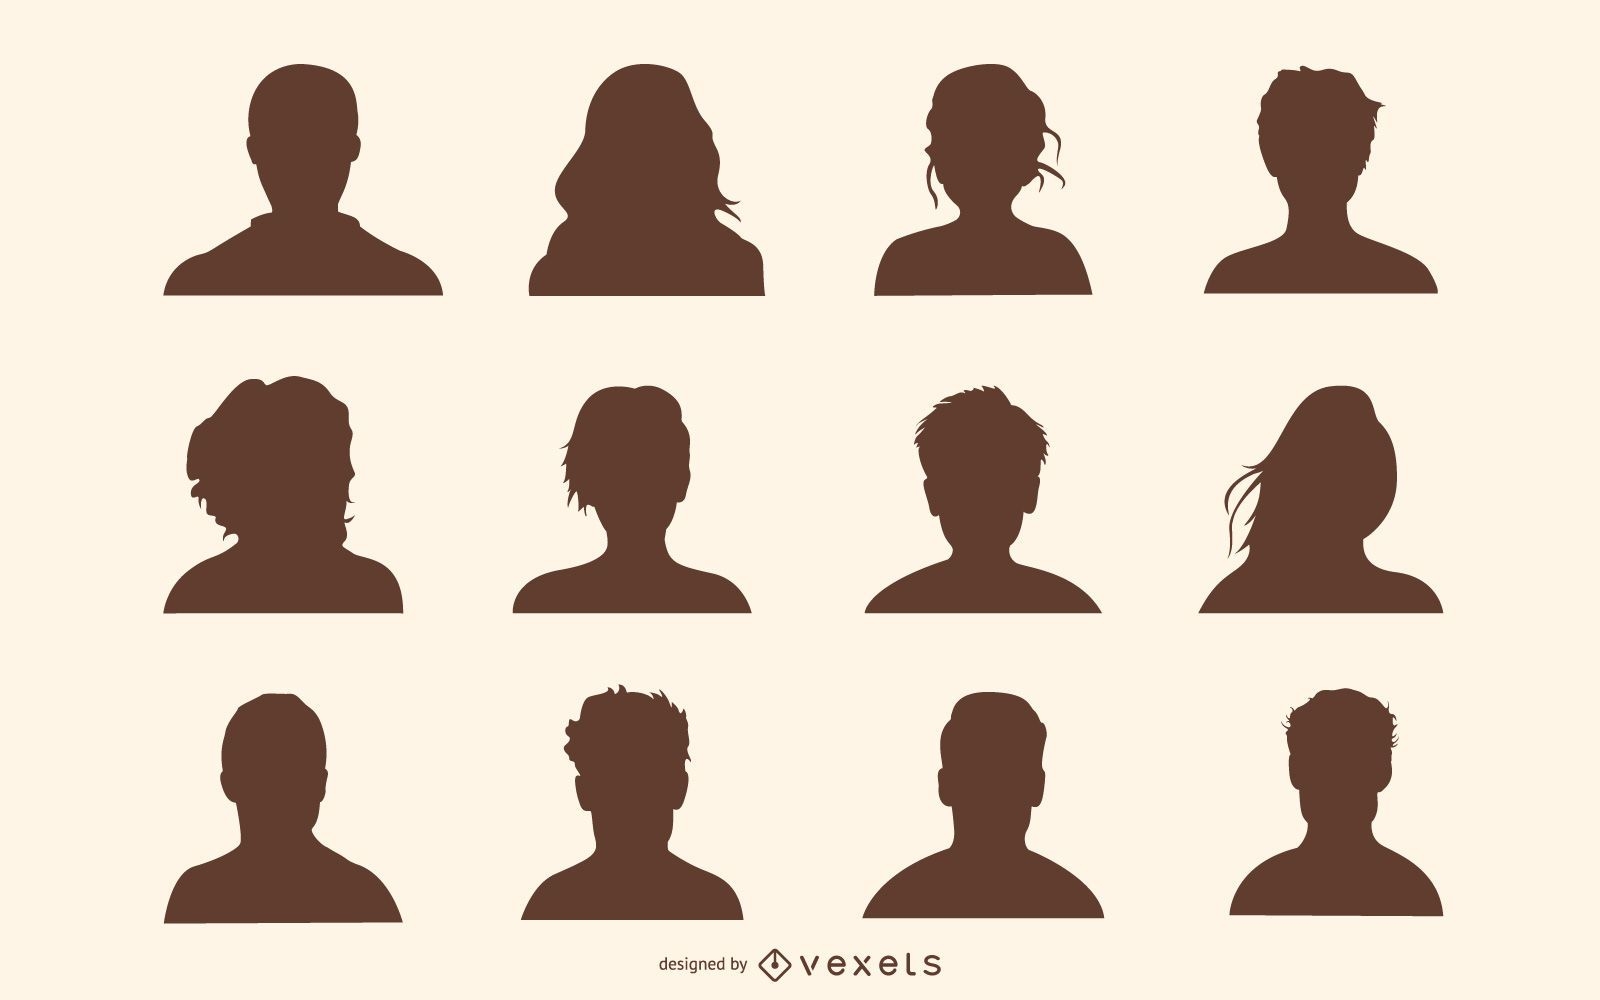 Avatar Images Browse 1455503 Stock Photos  Vectors Free Download with  Trial  Shutterstock